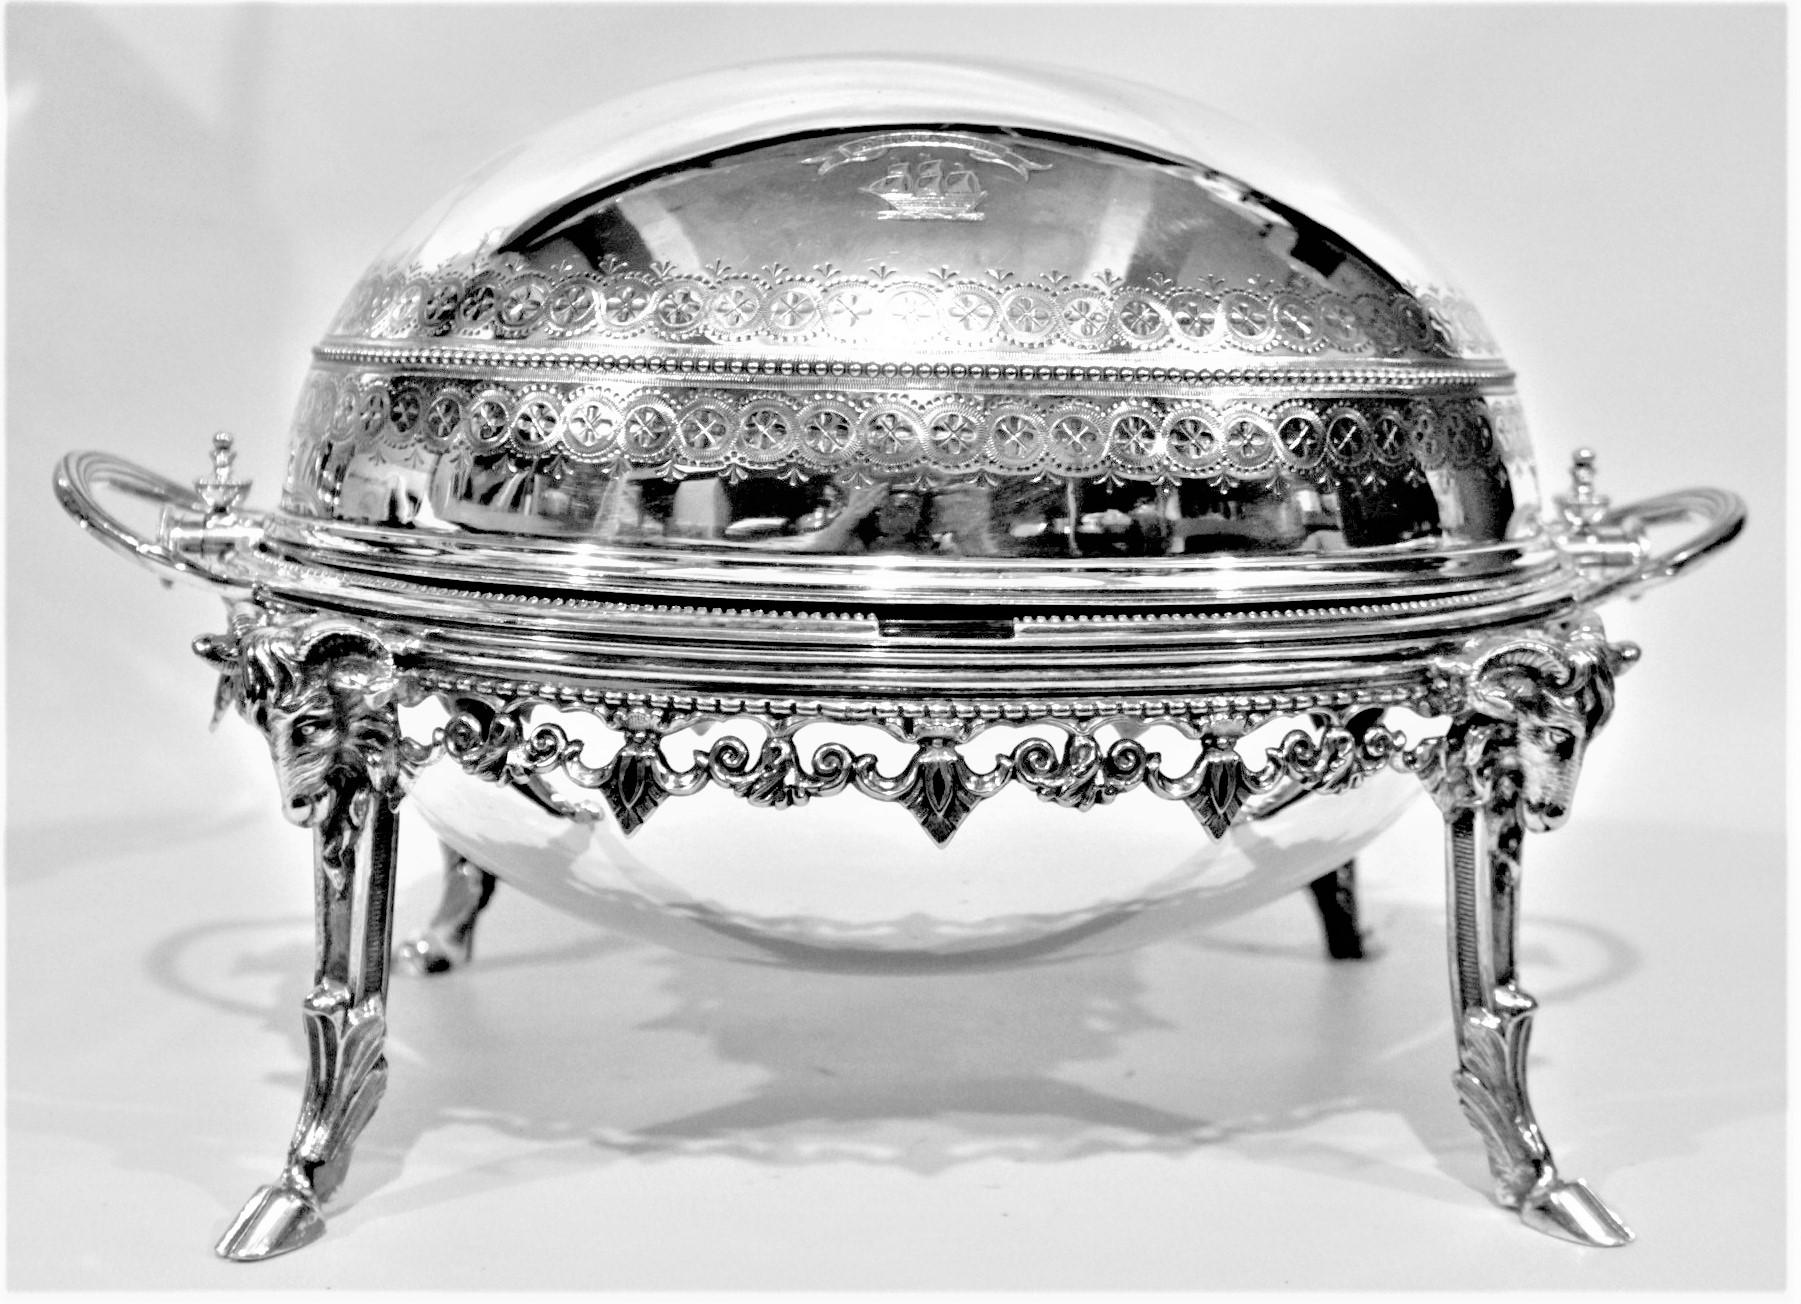 19th Century Antique English Silver Plated Revolving Breakfast Dome with Figural Ram Accents For Sale